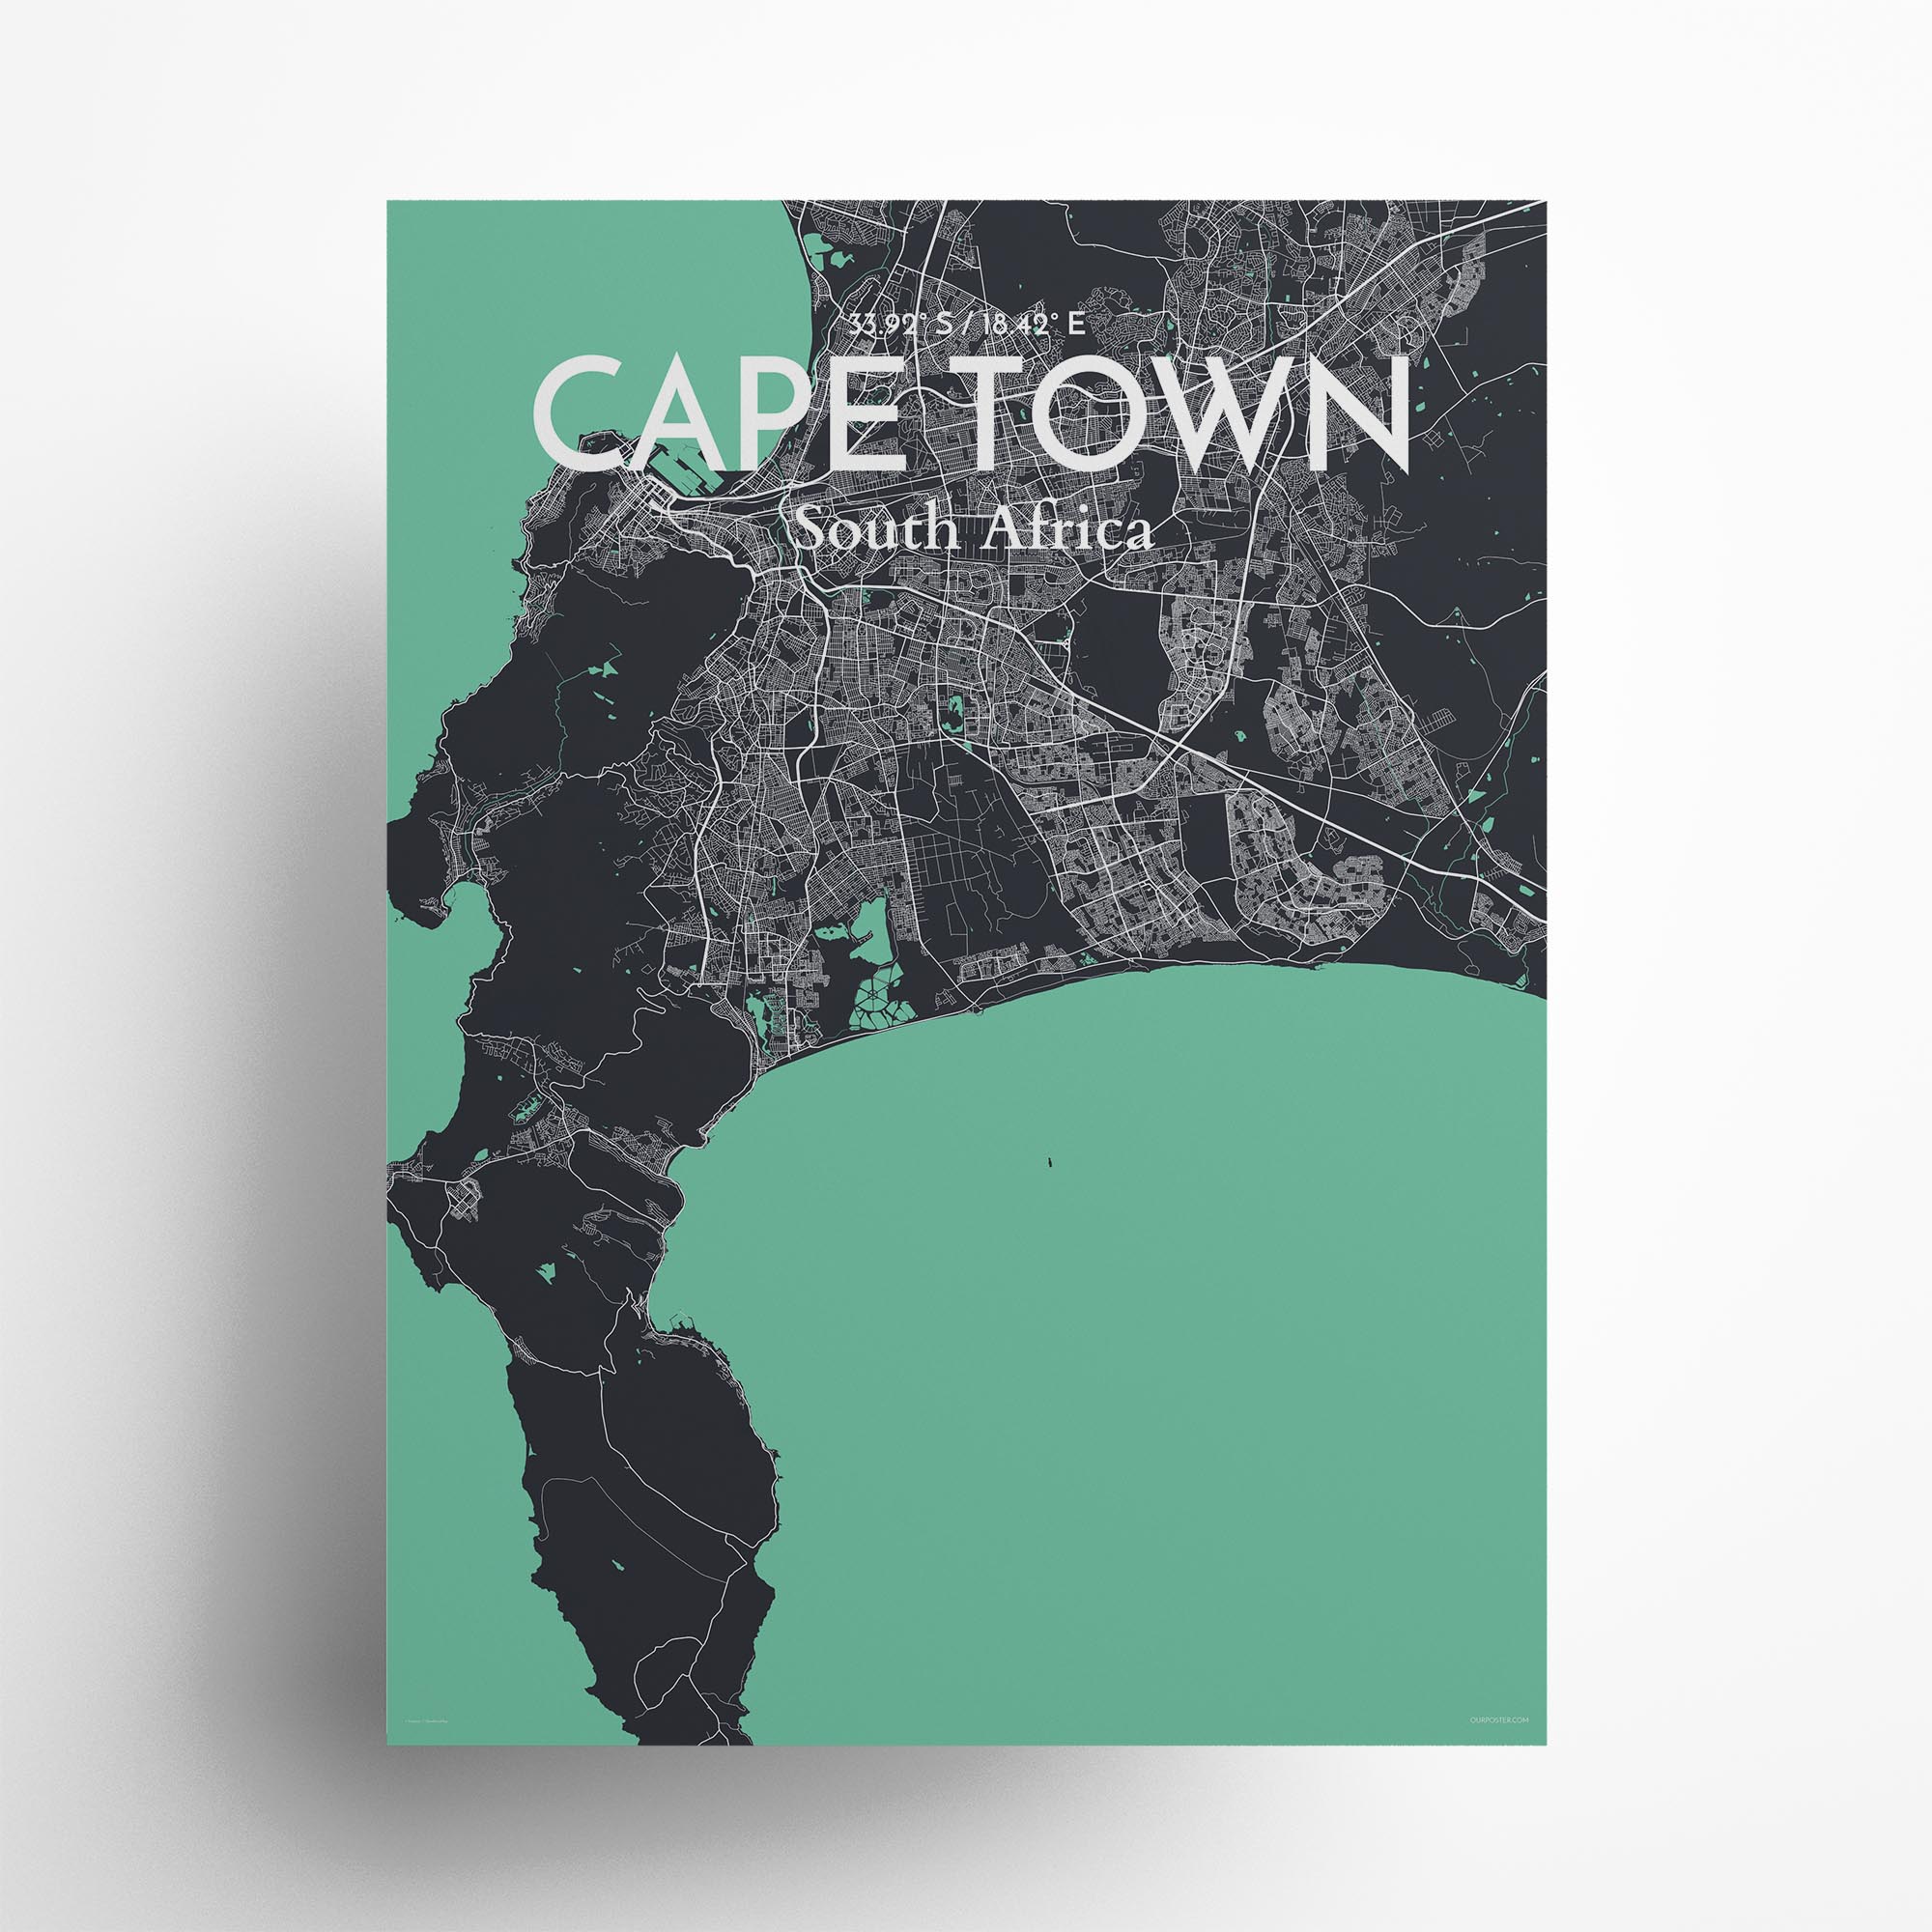 Cape Town city map poster in Dream of size 18" x 24"